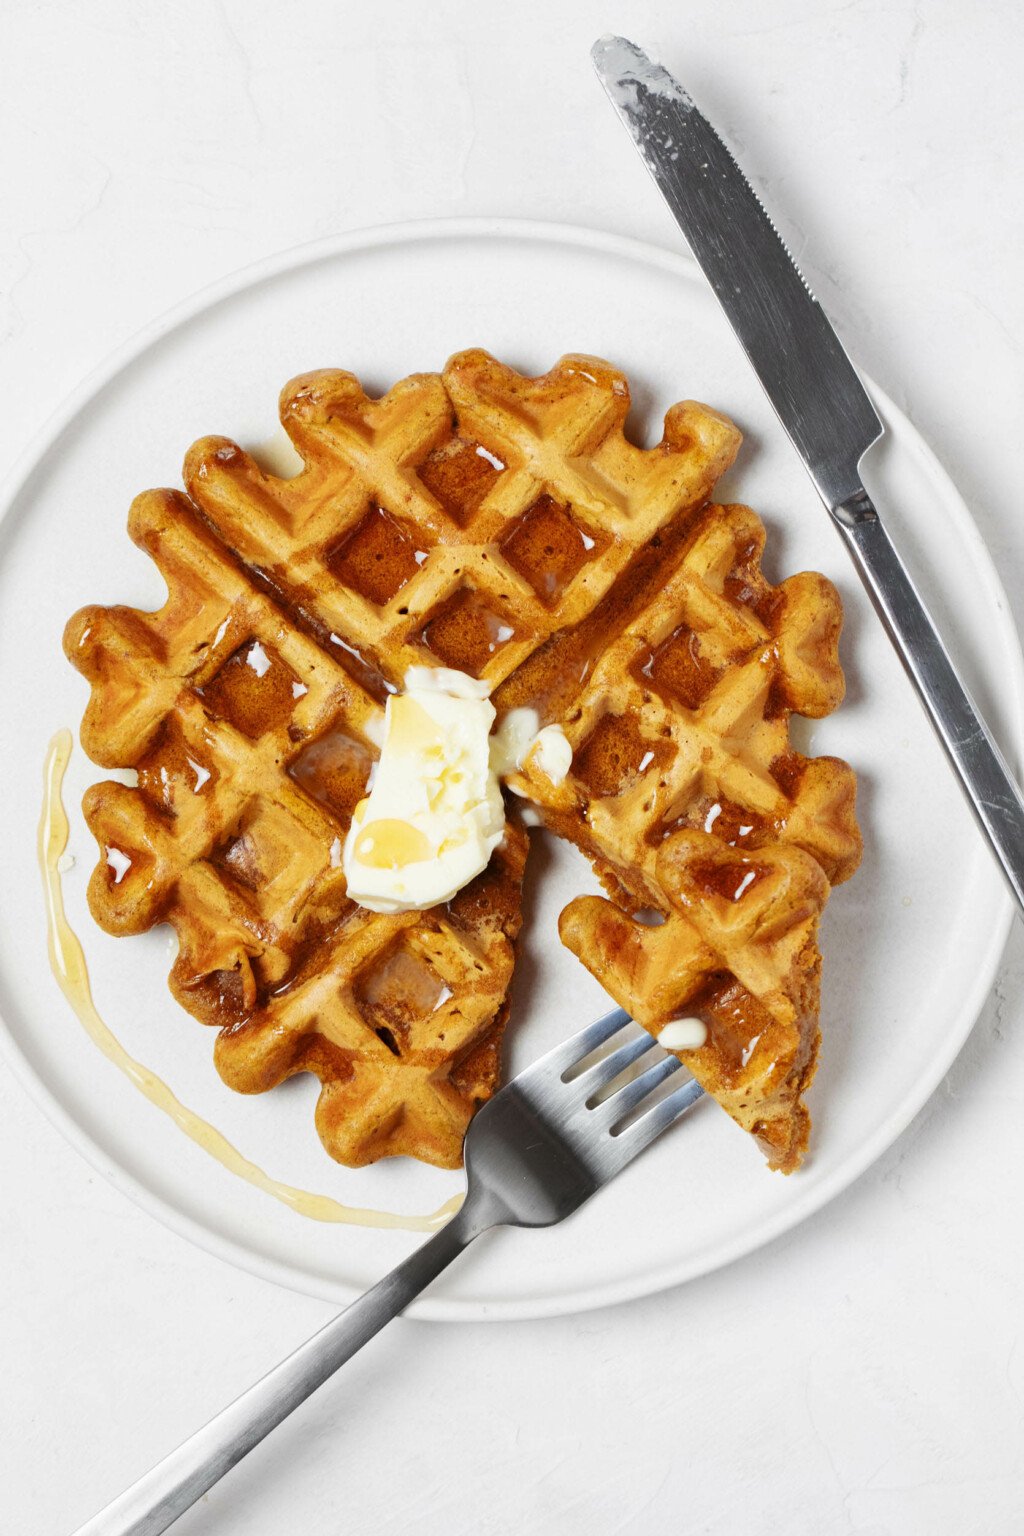 An overhead image of a vegan pumpkin waffle, which is being served on a round, white plate. A fork and knife are being used to slice the waffle, which is topped with a pat of butter and a drizzle of maple syrup.